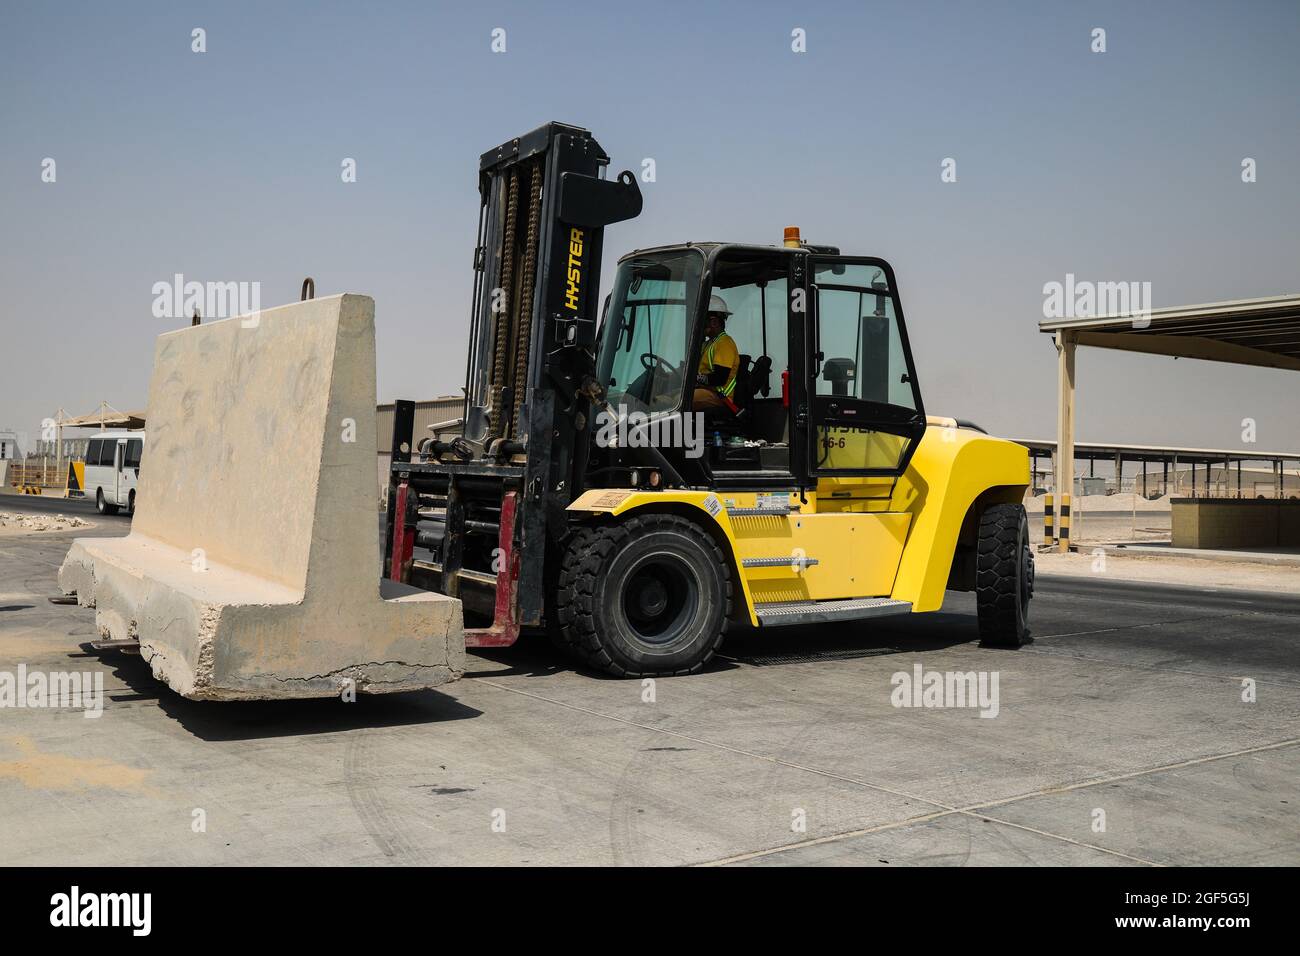 A civilian contractor operates a forklift to move a concrete T-Wall to provide additional security for Afghan evacuees in the CENTCOM AOR, Aug. 22, 2021. U.S. service members are assisting the Department of State with an orderly drawdown of designated personnel in Afghanistan. (U.S. Army photo by Sgt. Jimmie Baker) Stock Photo